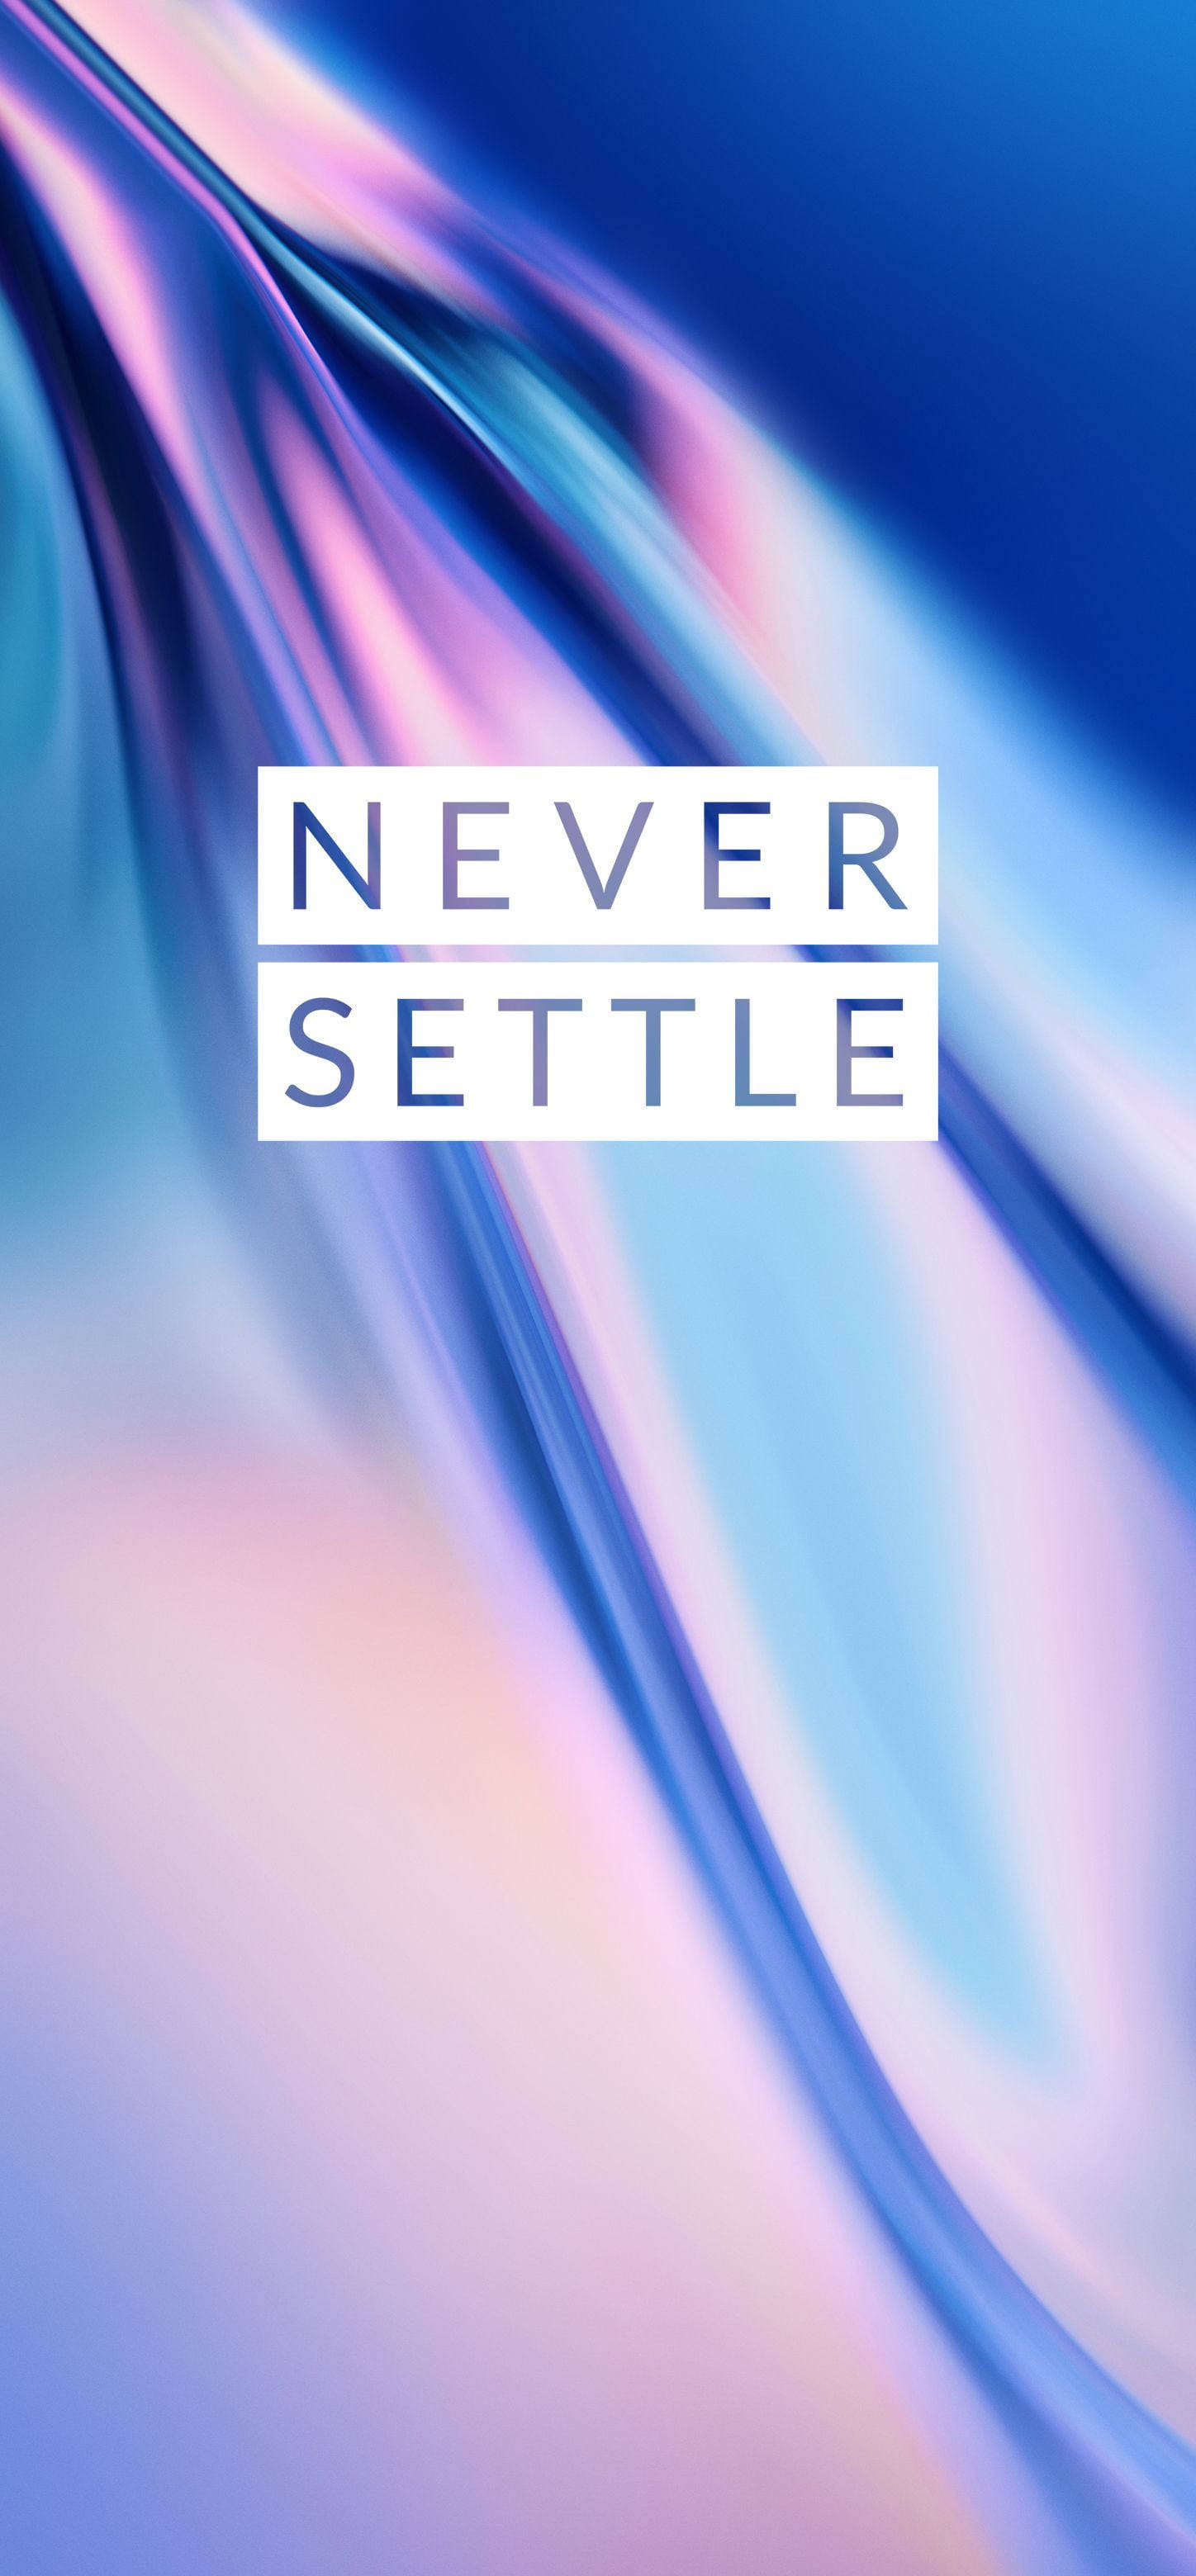 A vibrant vision of style - OnePlus 7 Pro in Nebula Blue Wallpaper